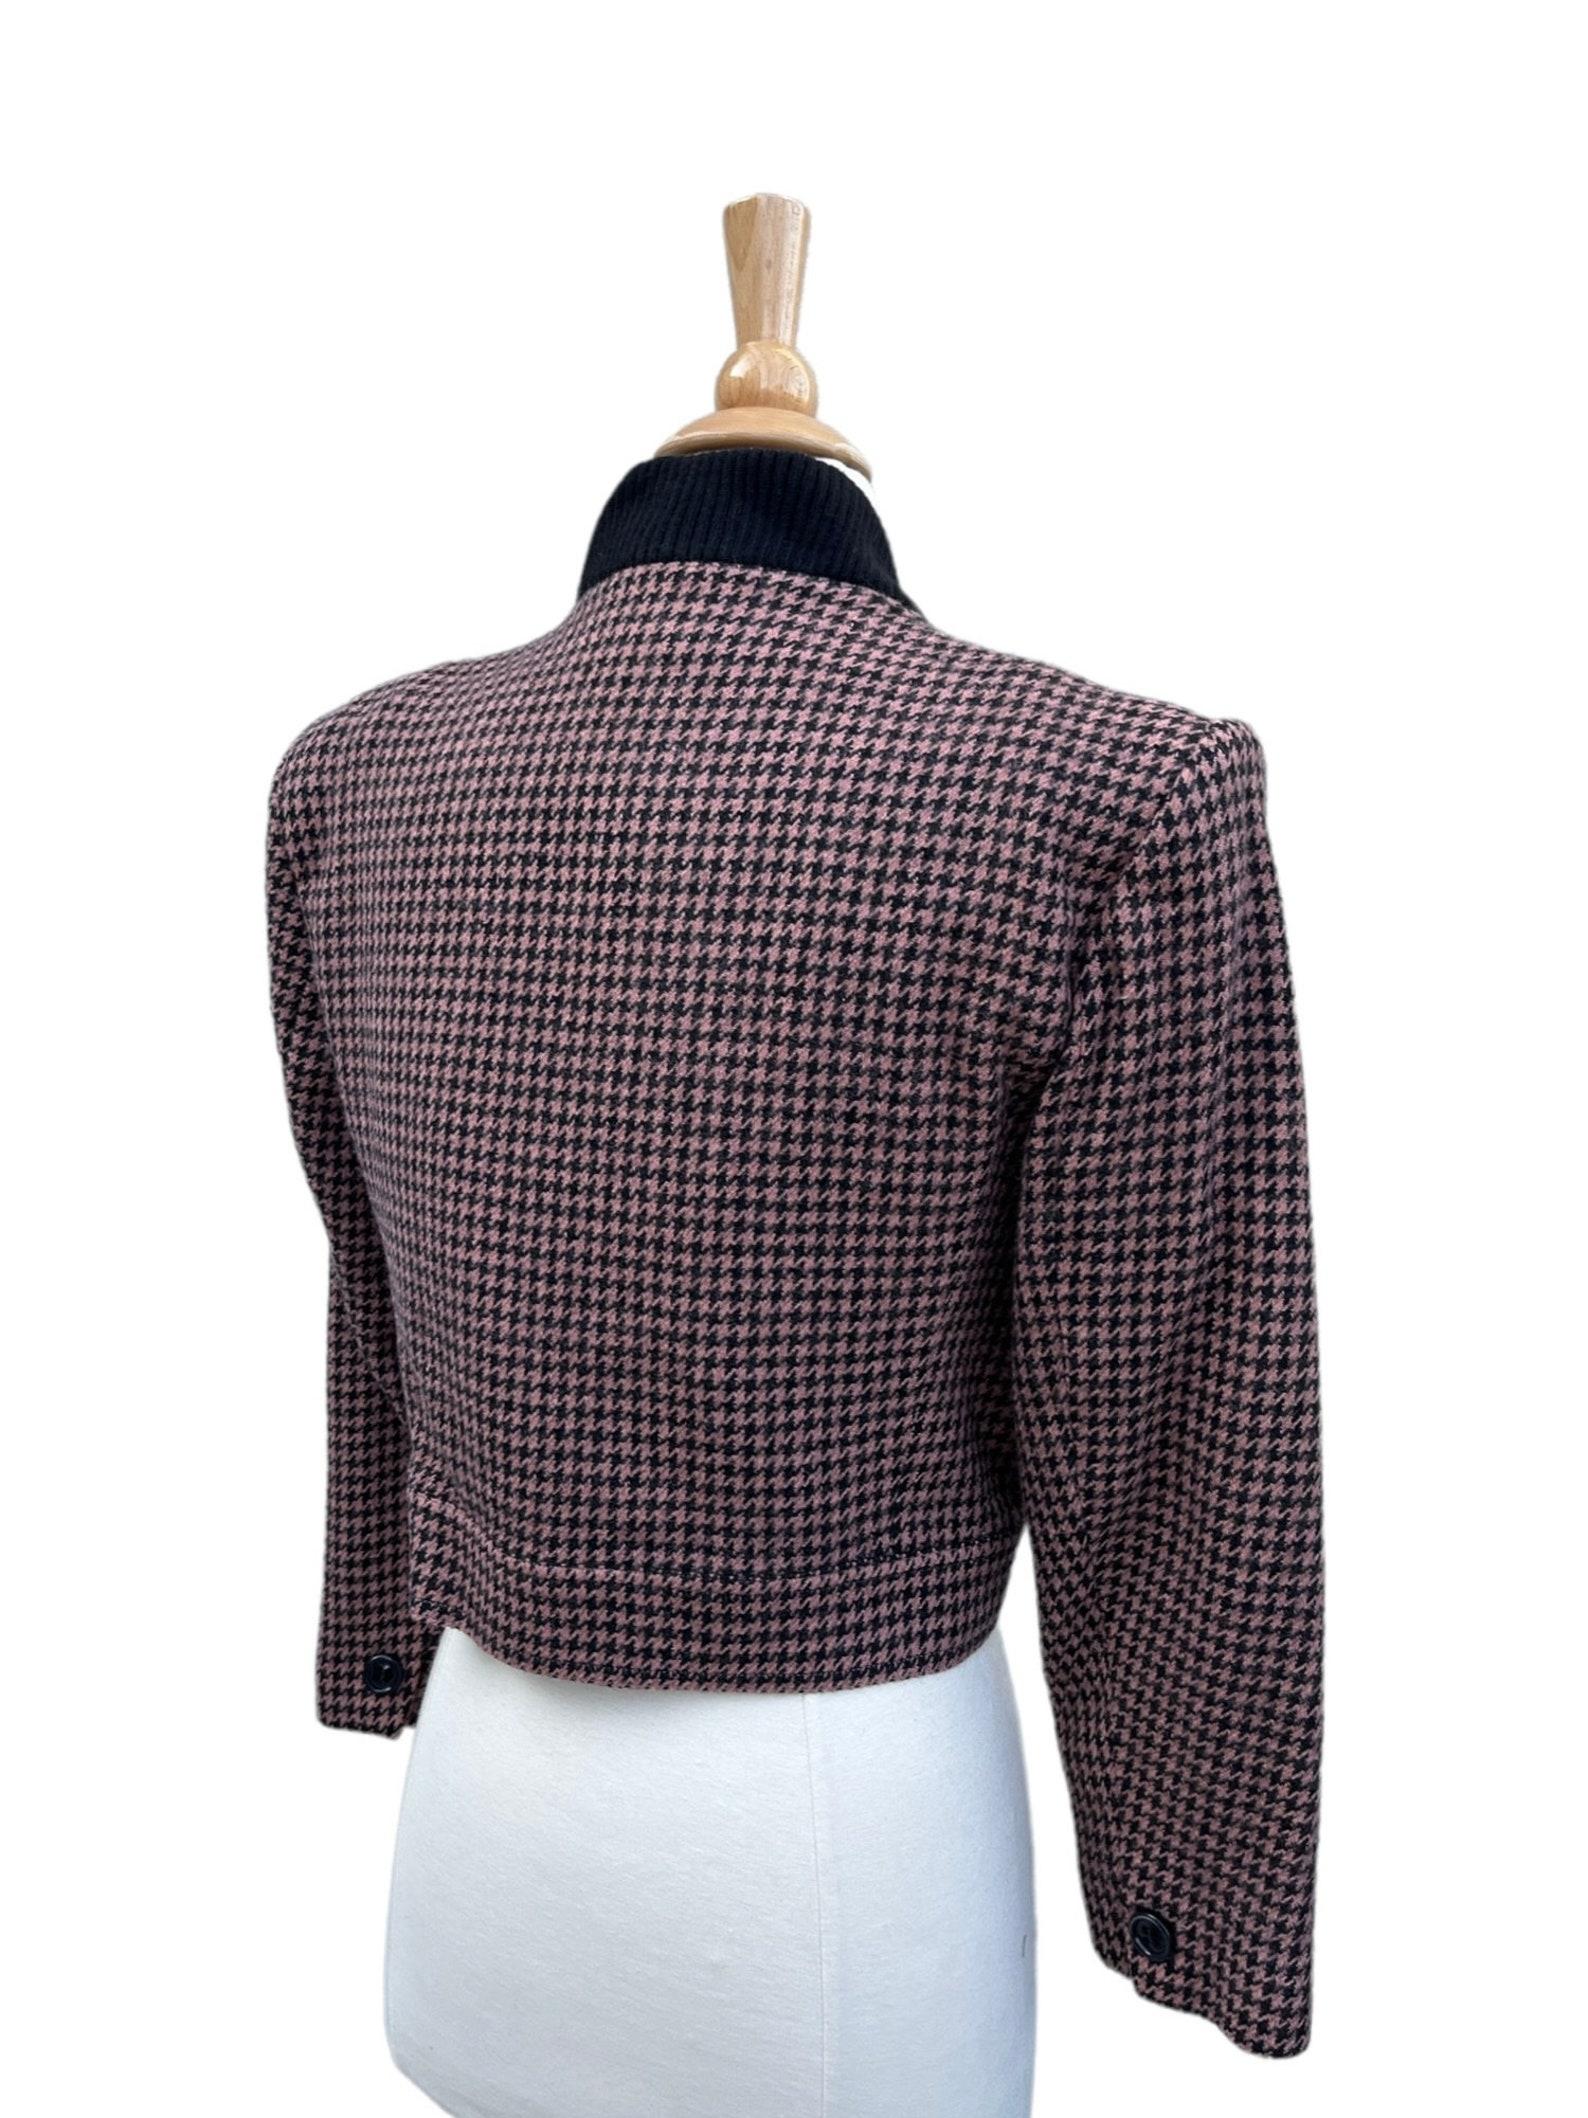 Guy Laroche houndstooth jacket For Sale 4